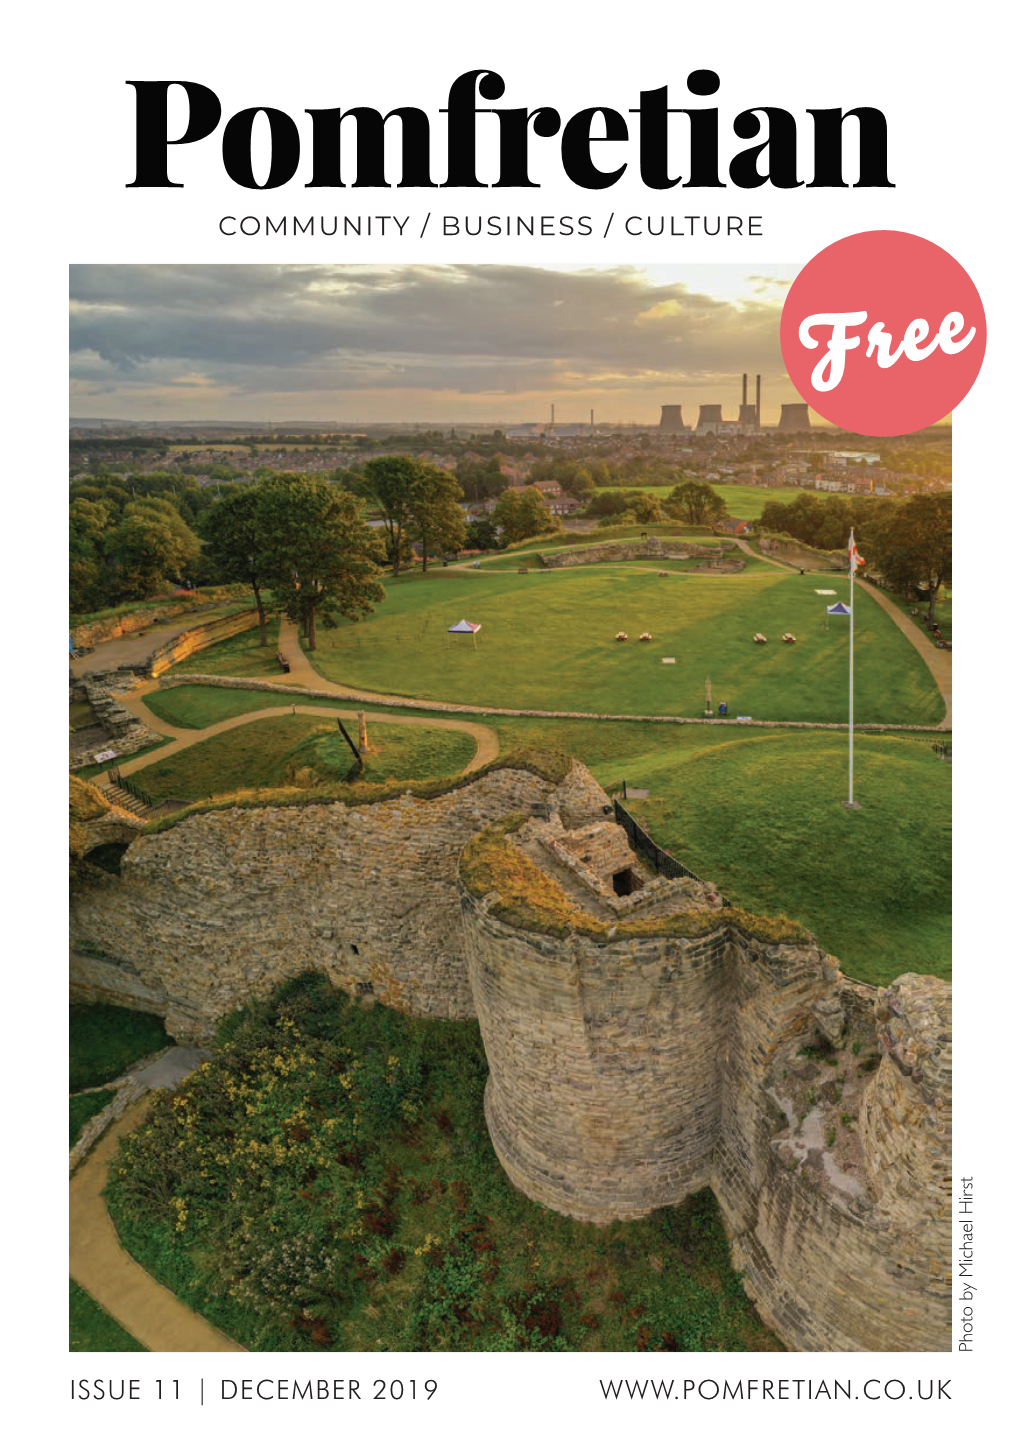 Community / Business / Culture Issue 11 | December